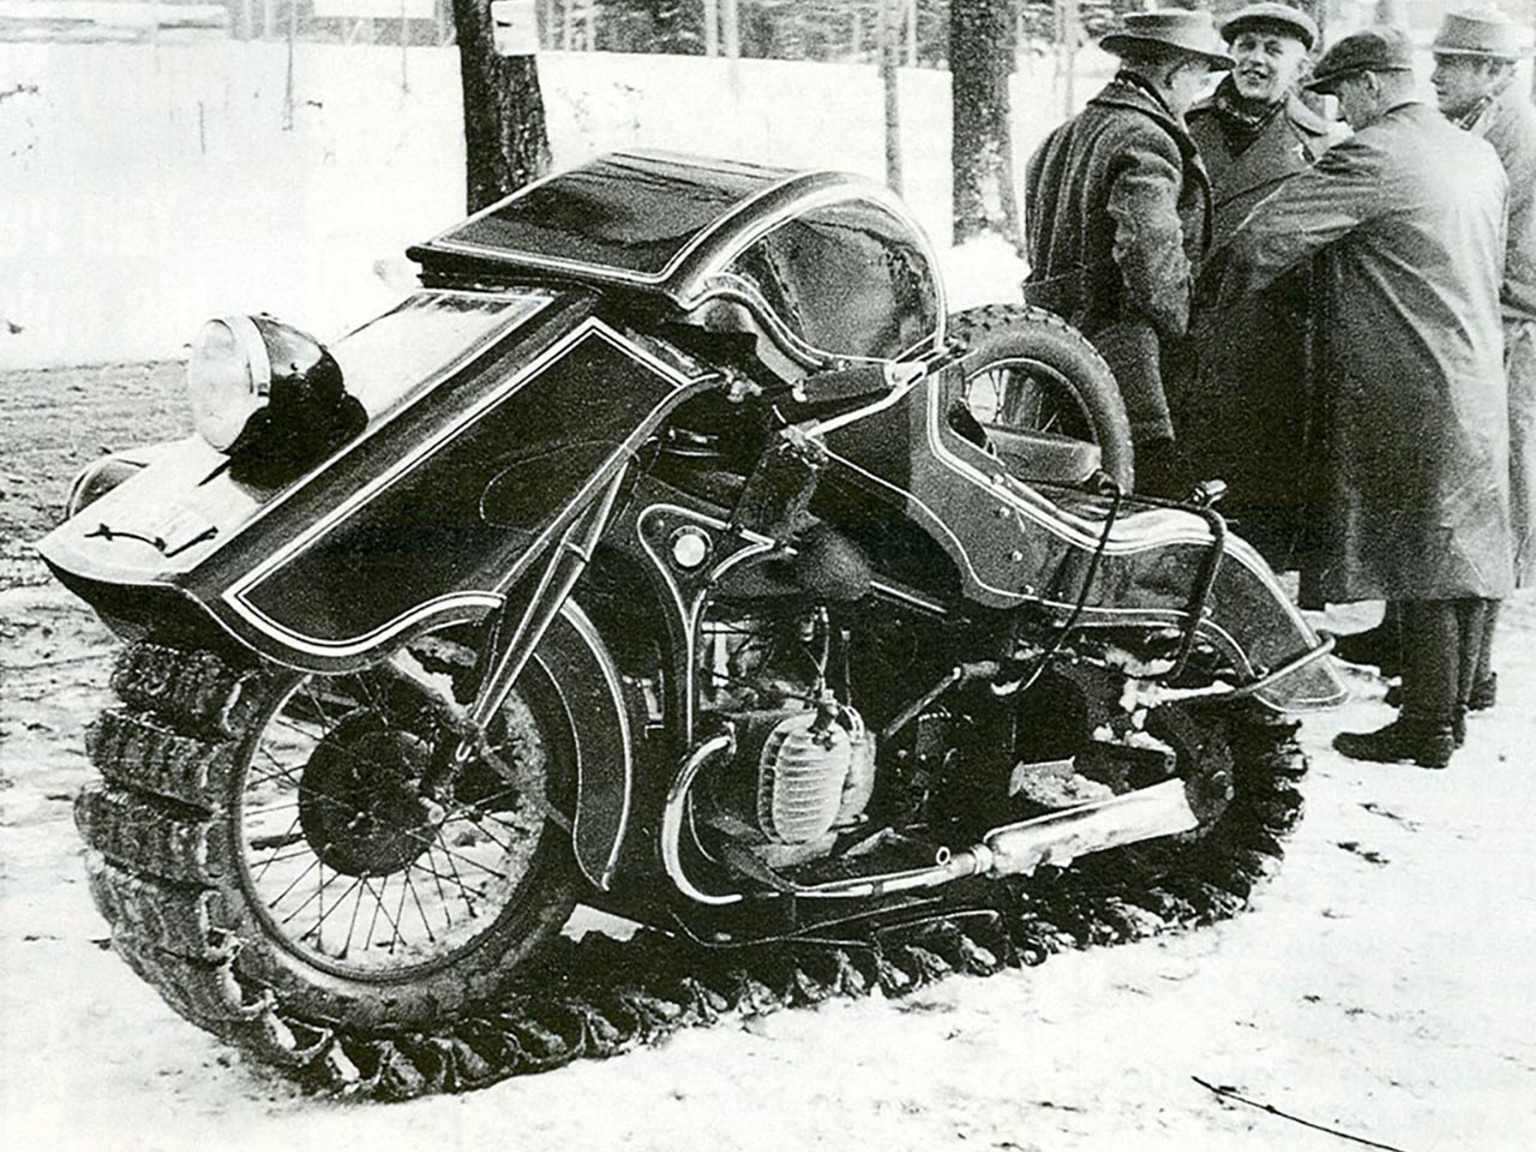 People stand near a BMW Schneekrad which was an all-terrain motorcycle in Germany in 1936.
https://silodrome.com/brutsch-mopetta/